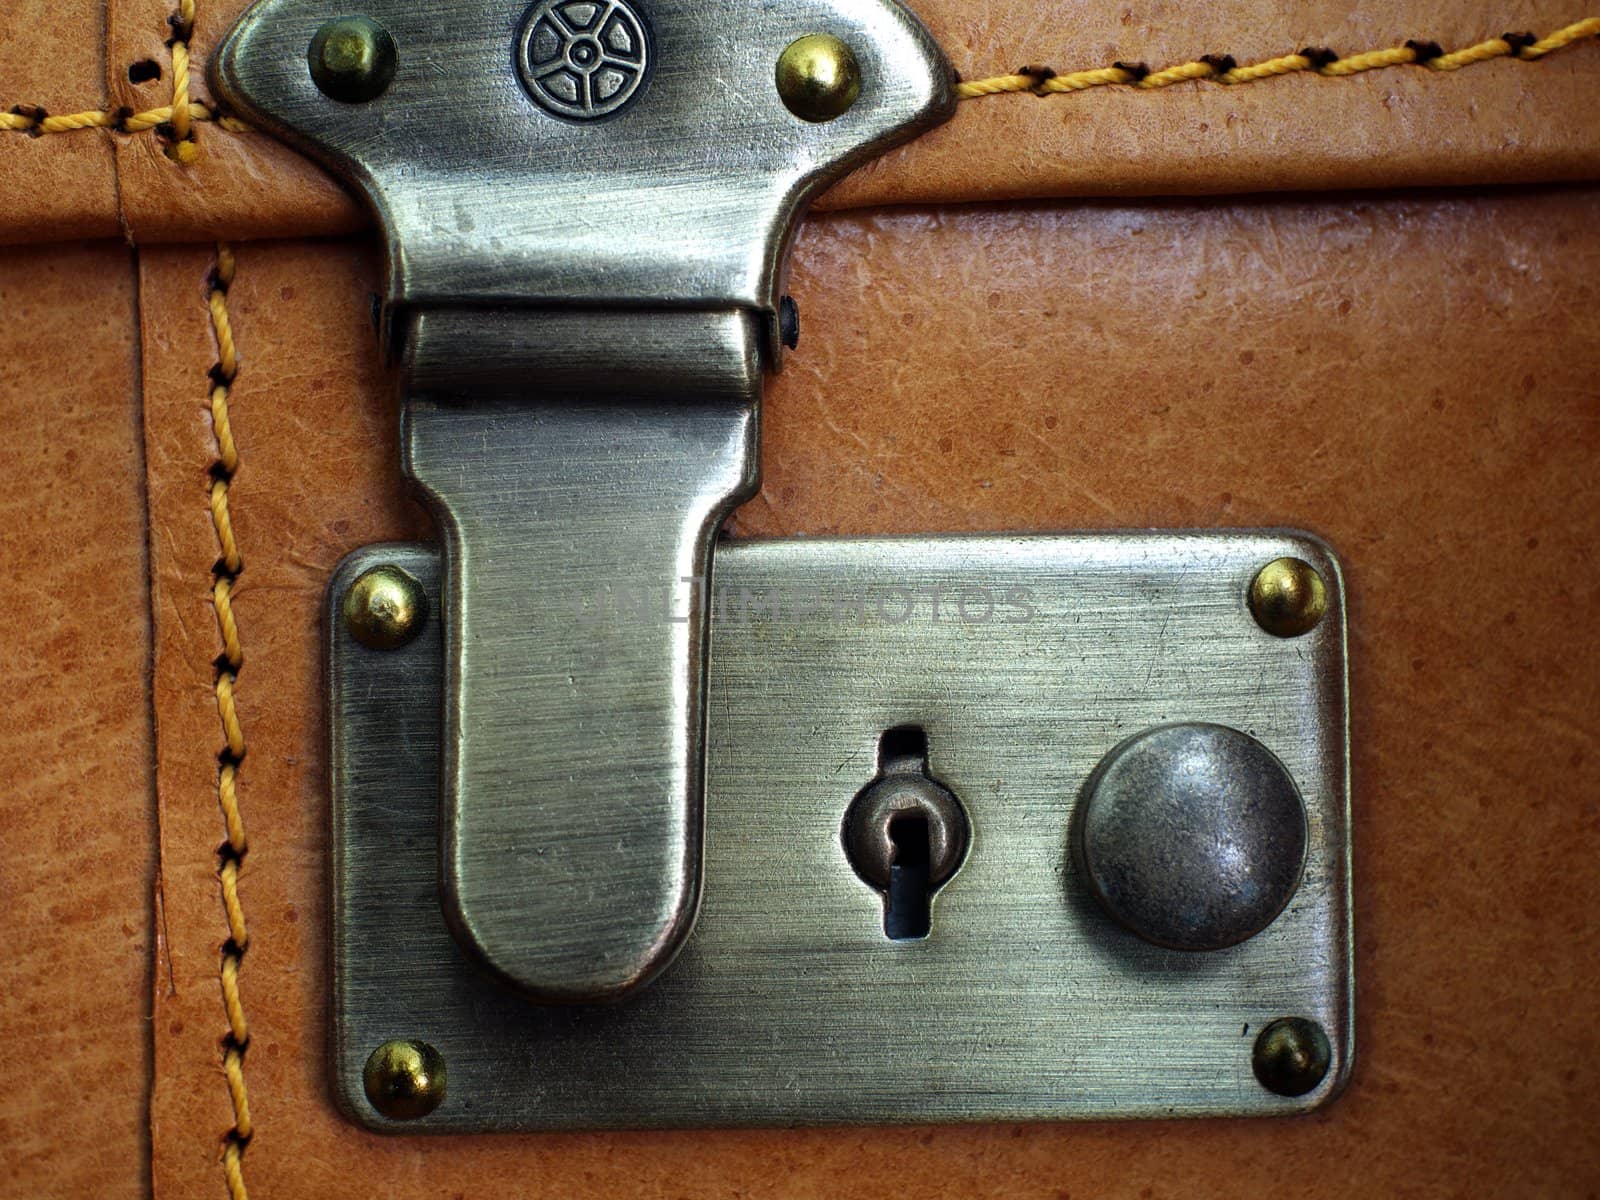 Close up of the lock on leather suitcase.